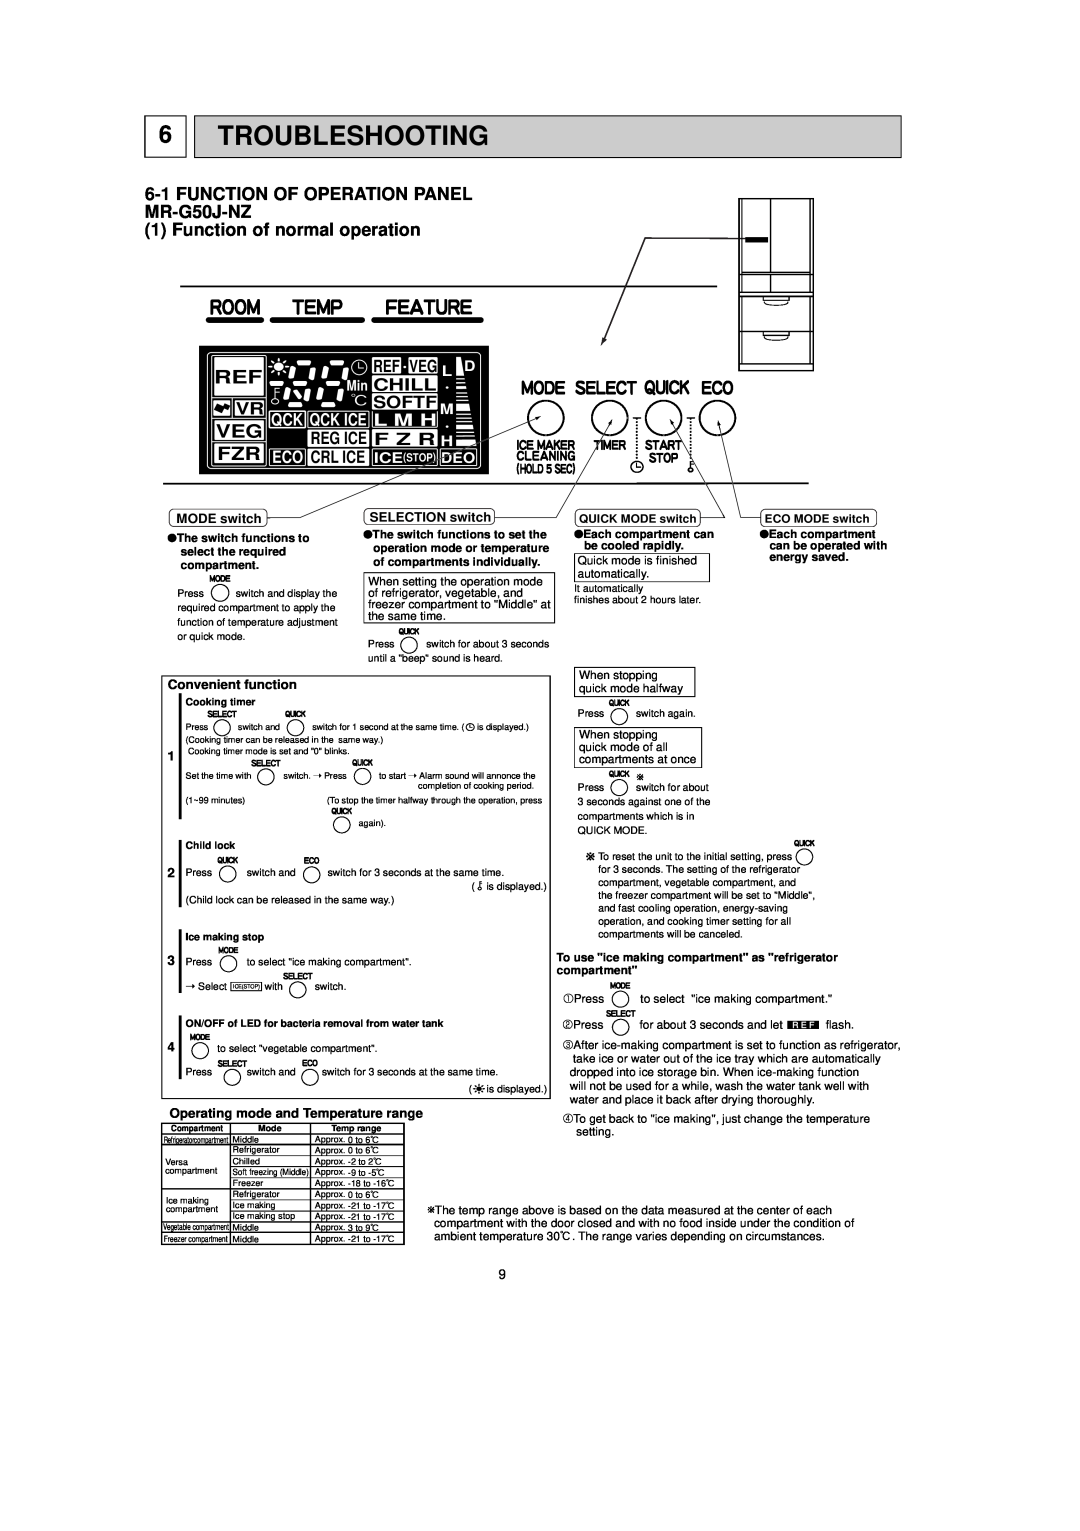 Mitsubishi Electronics MR-G50J-SS-NZ Troubleshooting, FUNCTION OF OPERATION PANEL MR-G50J-NZ, Function of normal operation 